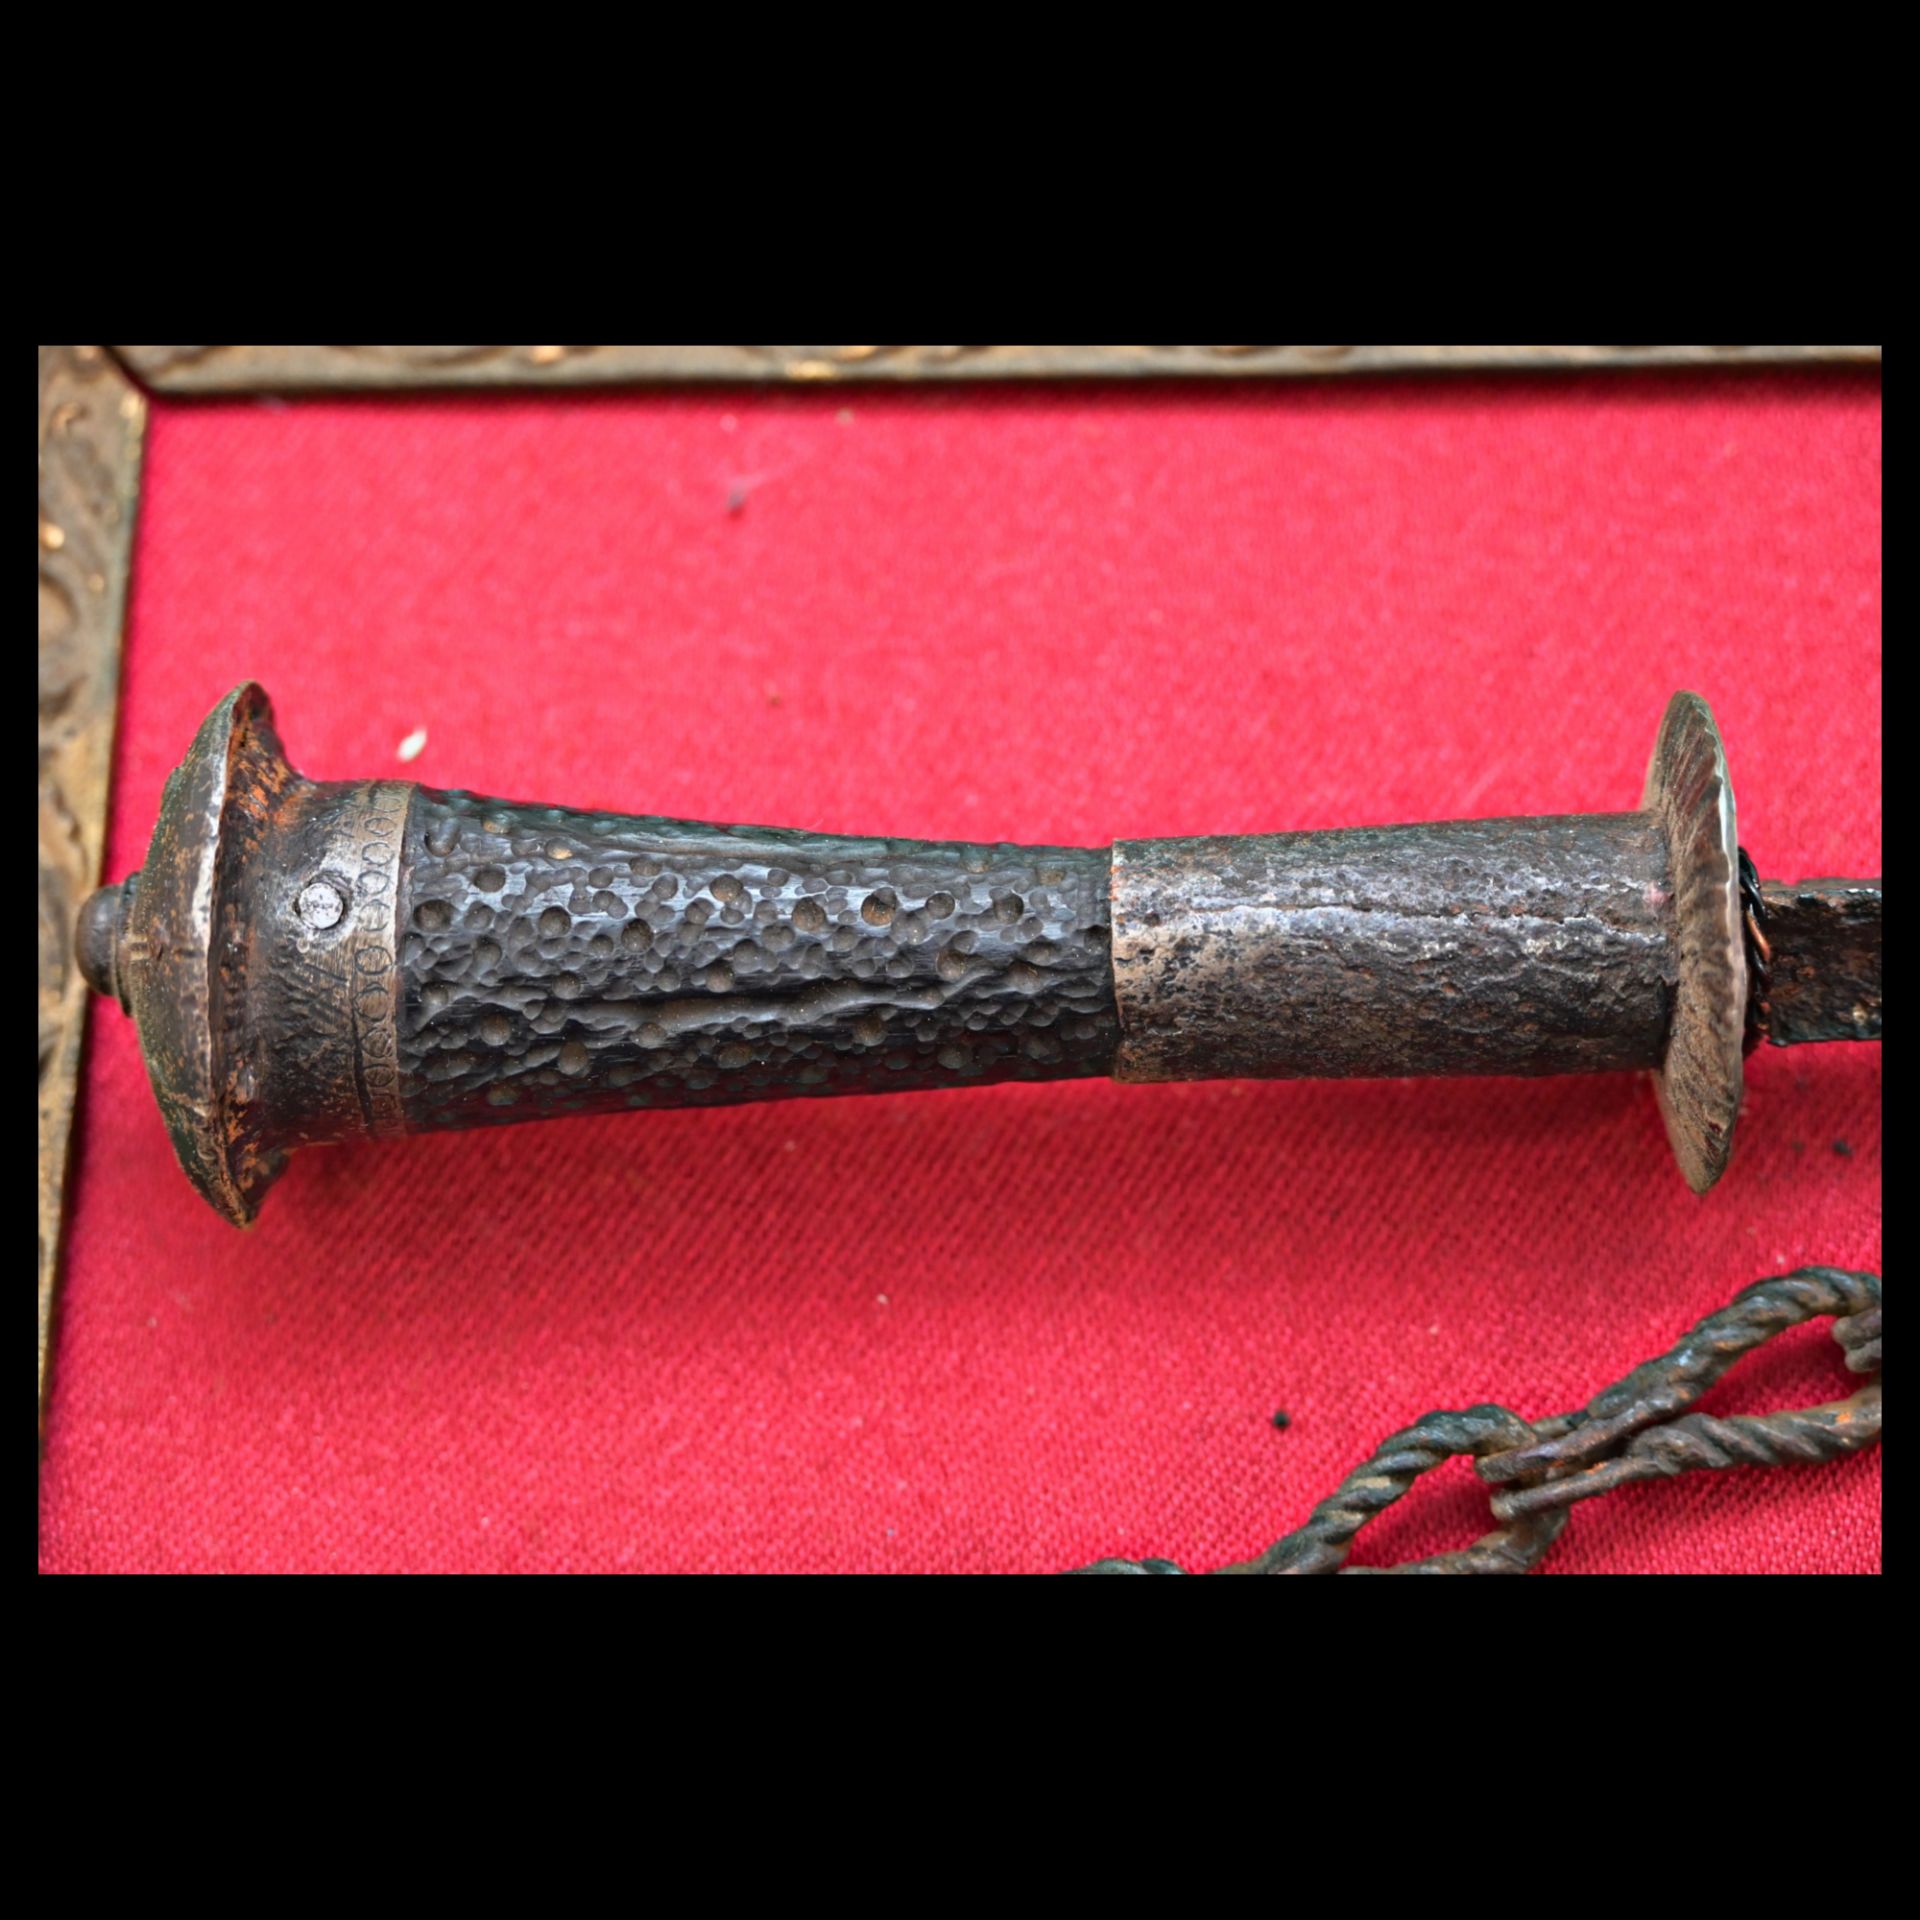 A very rare Medieval Western Europe rondel dagger with wooden grip and scabbard details 14th-15th C. - Image 2 of 7